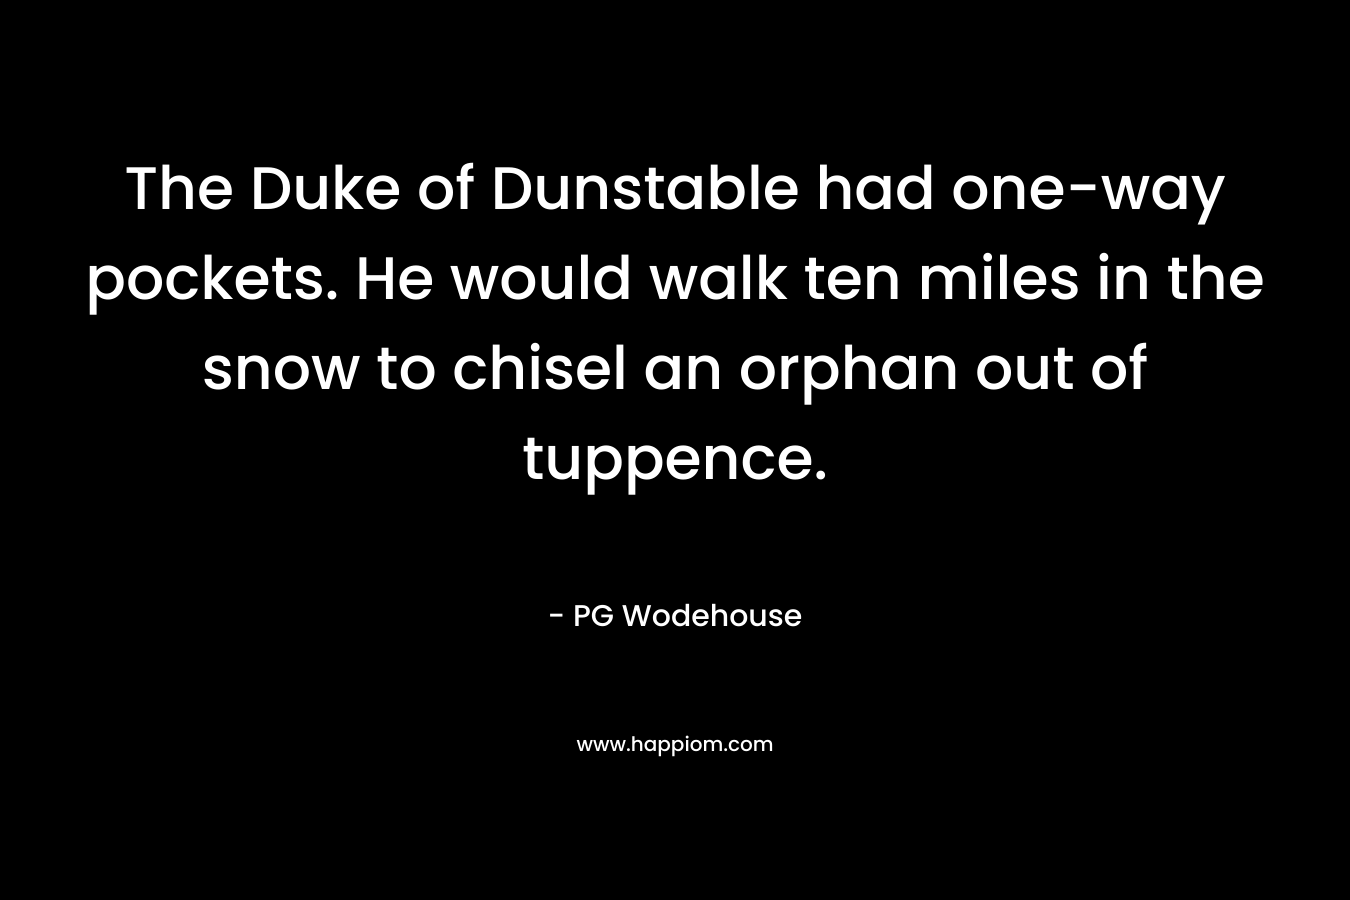 The Duke of Dunstable had one-way pockets. He would walk ten miles in the snow to chisel an orphan out of tuppence.